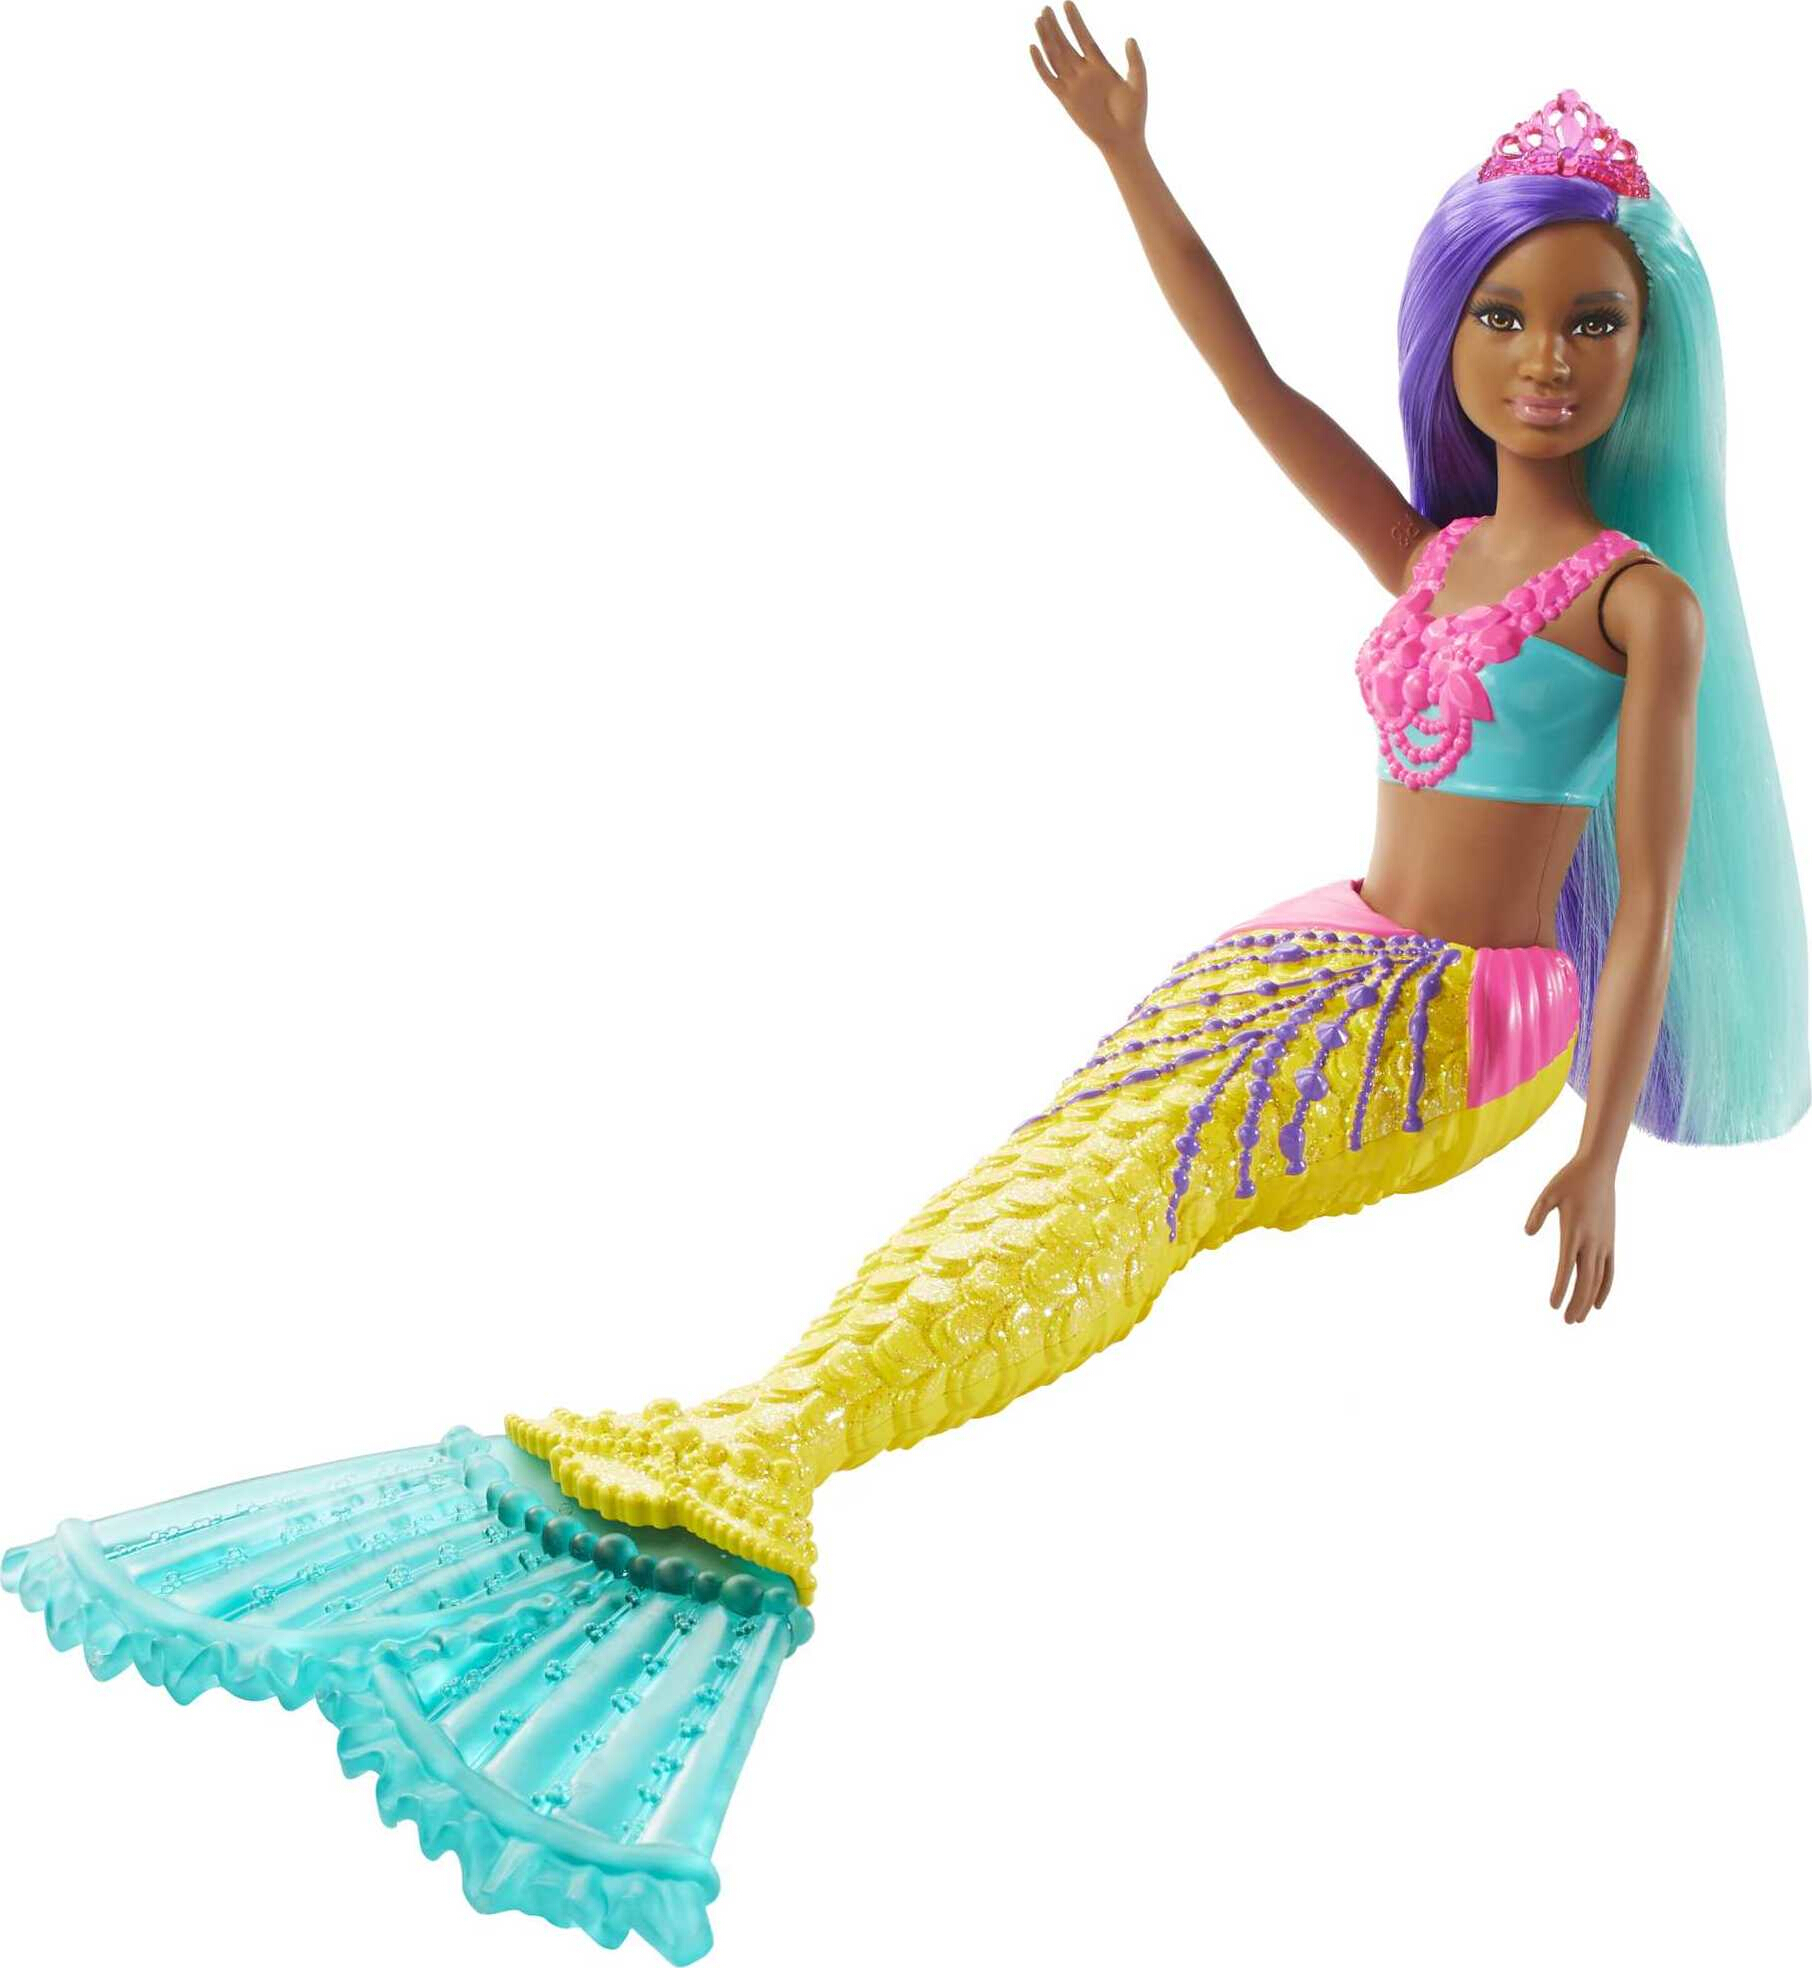 Barbie Dreamtopia Mermaid Doll with Teal & Purple Hair, Yellow Tail & Tiara Accessory - image 4 of 6